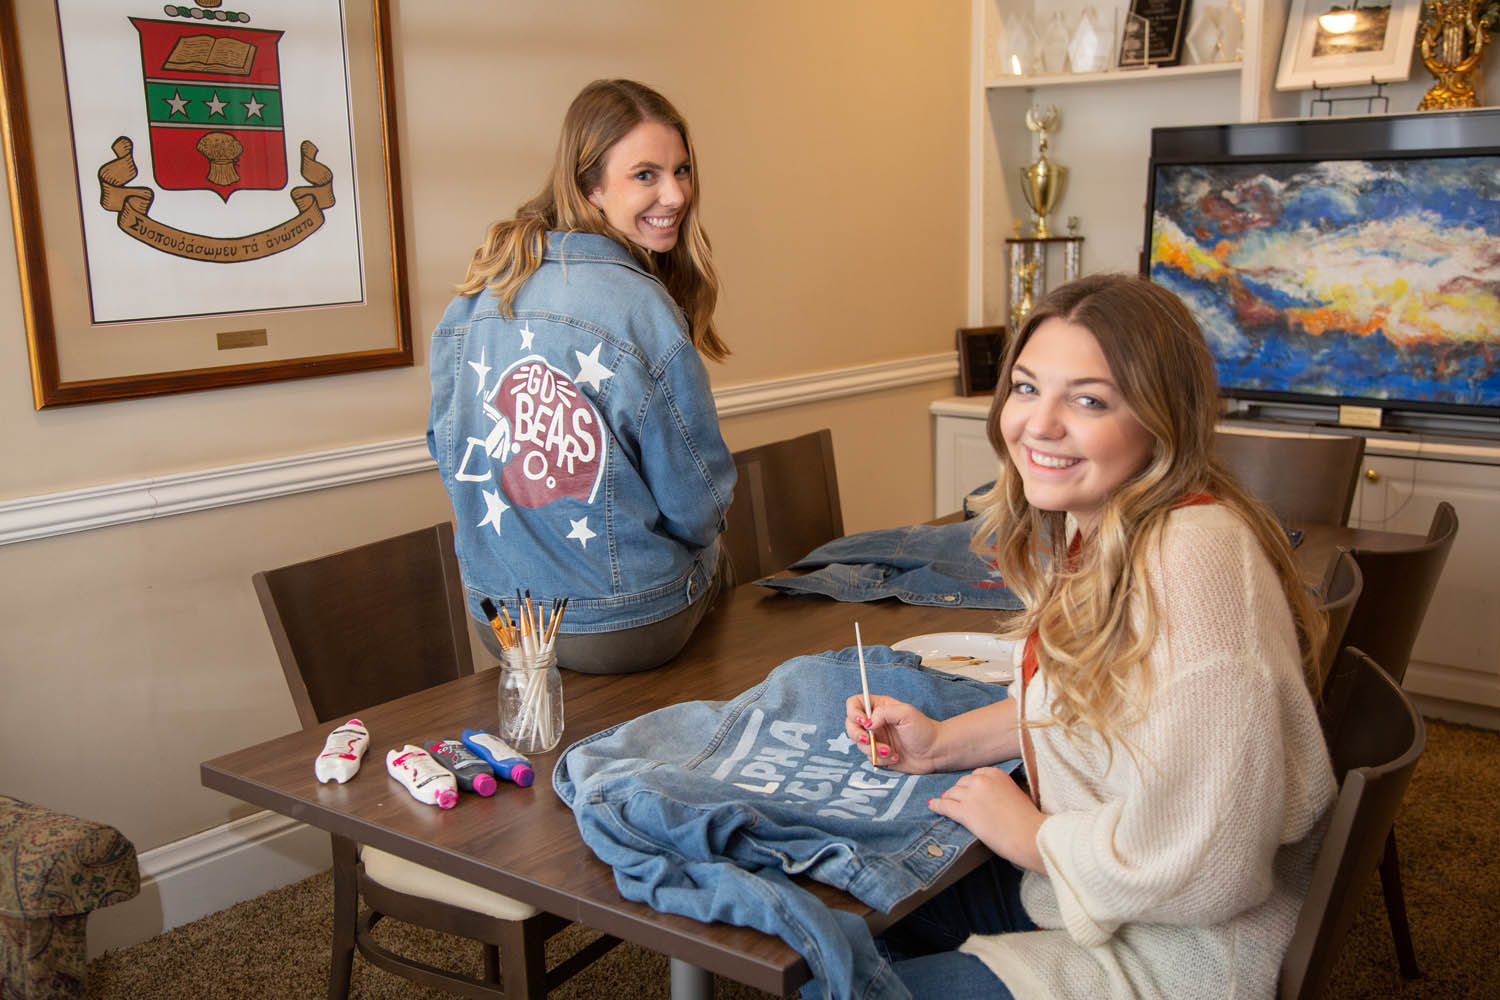 Missouri State University sophomores Jesse Romano, left, and Katie Sulzner plan to continue their small-business venture at least through college.